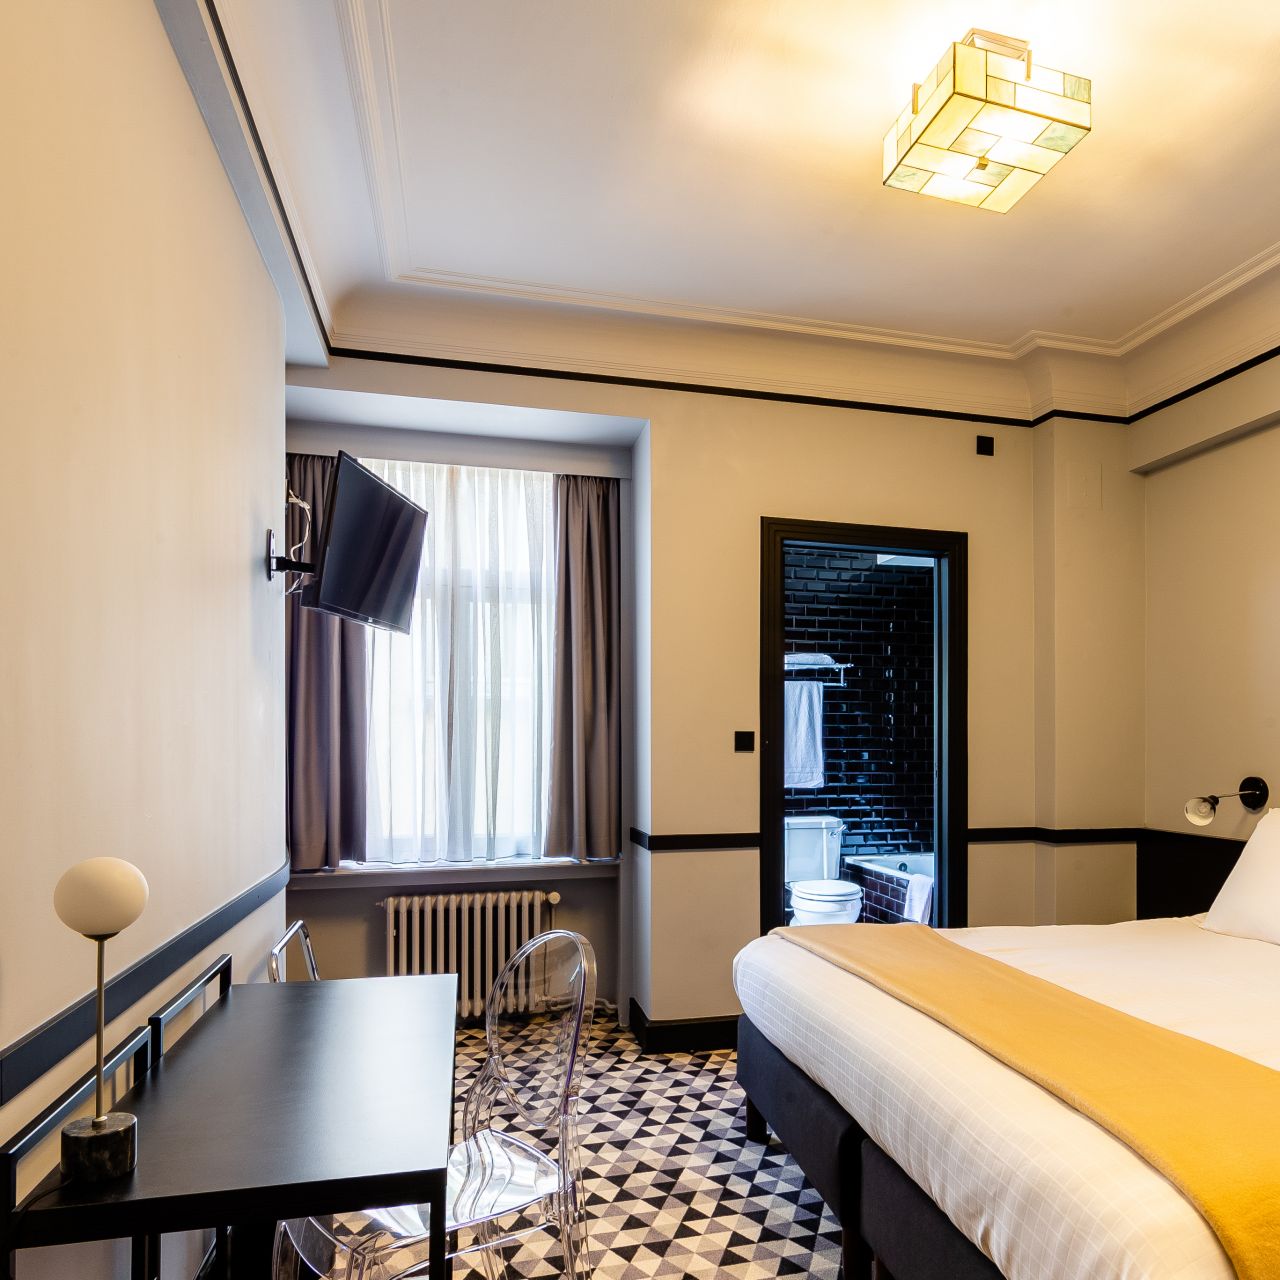 The Chess Hotel 4* - Paris - Up to -70%